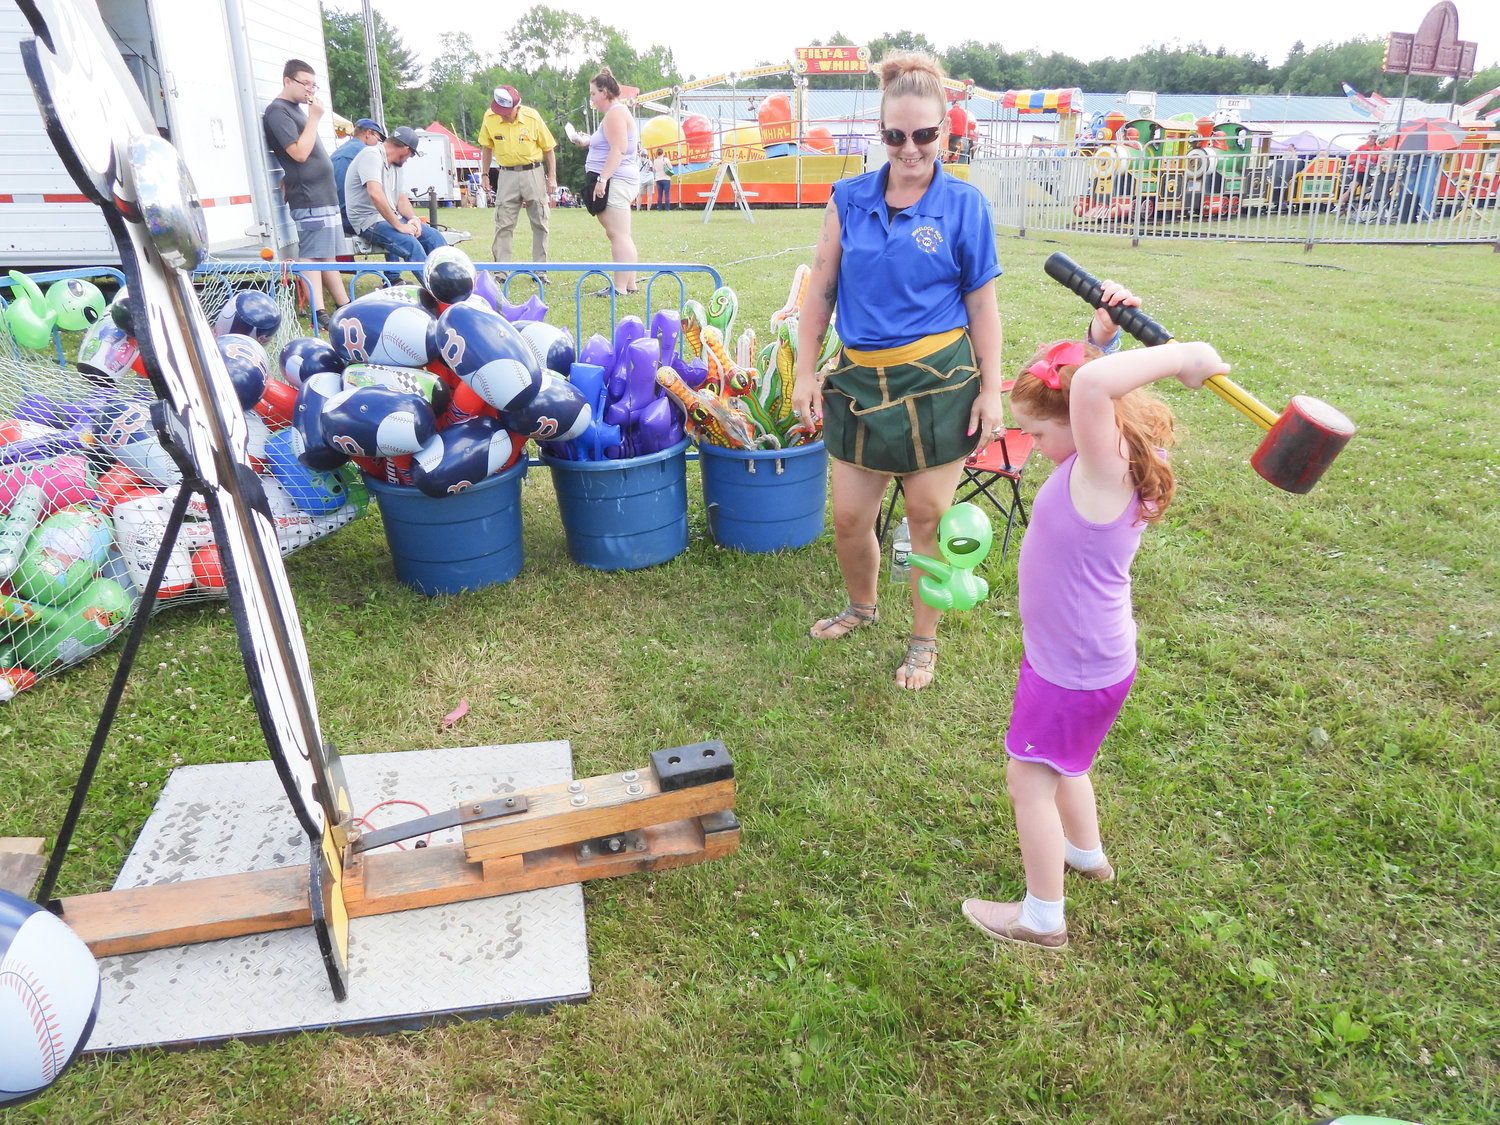 Pictured is four-year-old Carly Gibson of West Winfield, readying her hammer for the strength tester. The Madison County Fair runs until July 10.